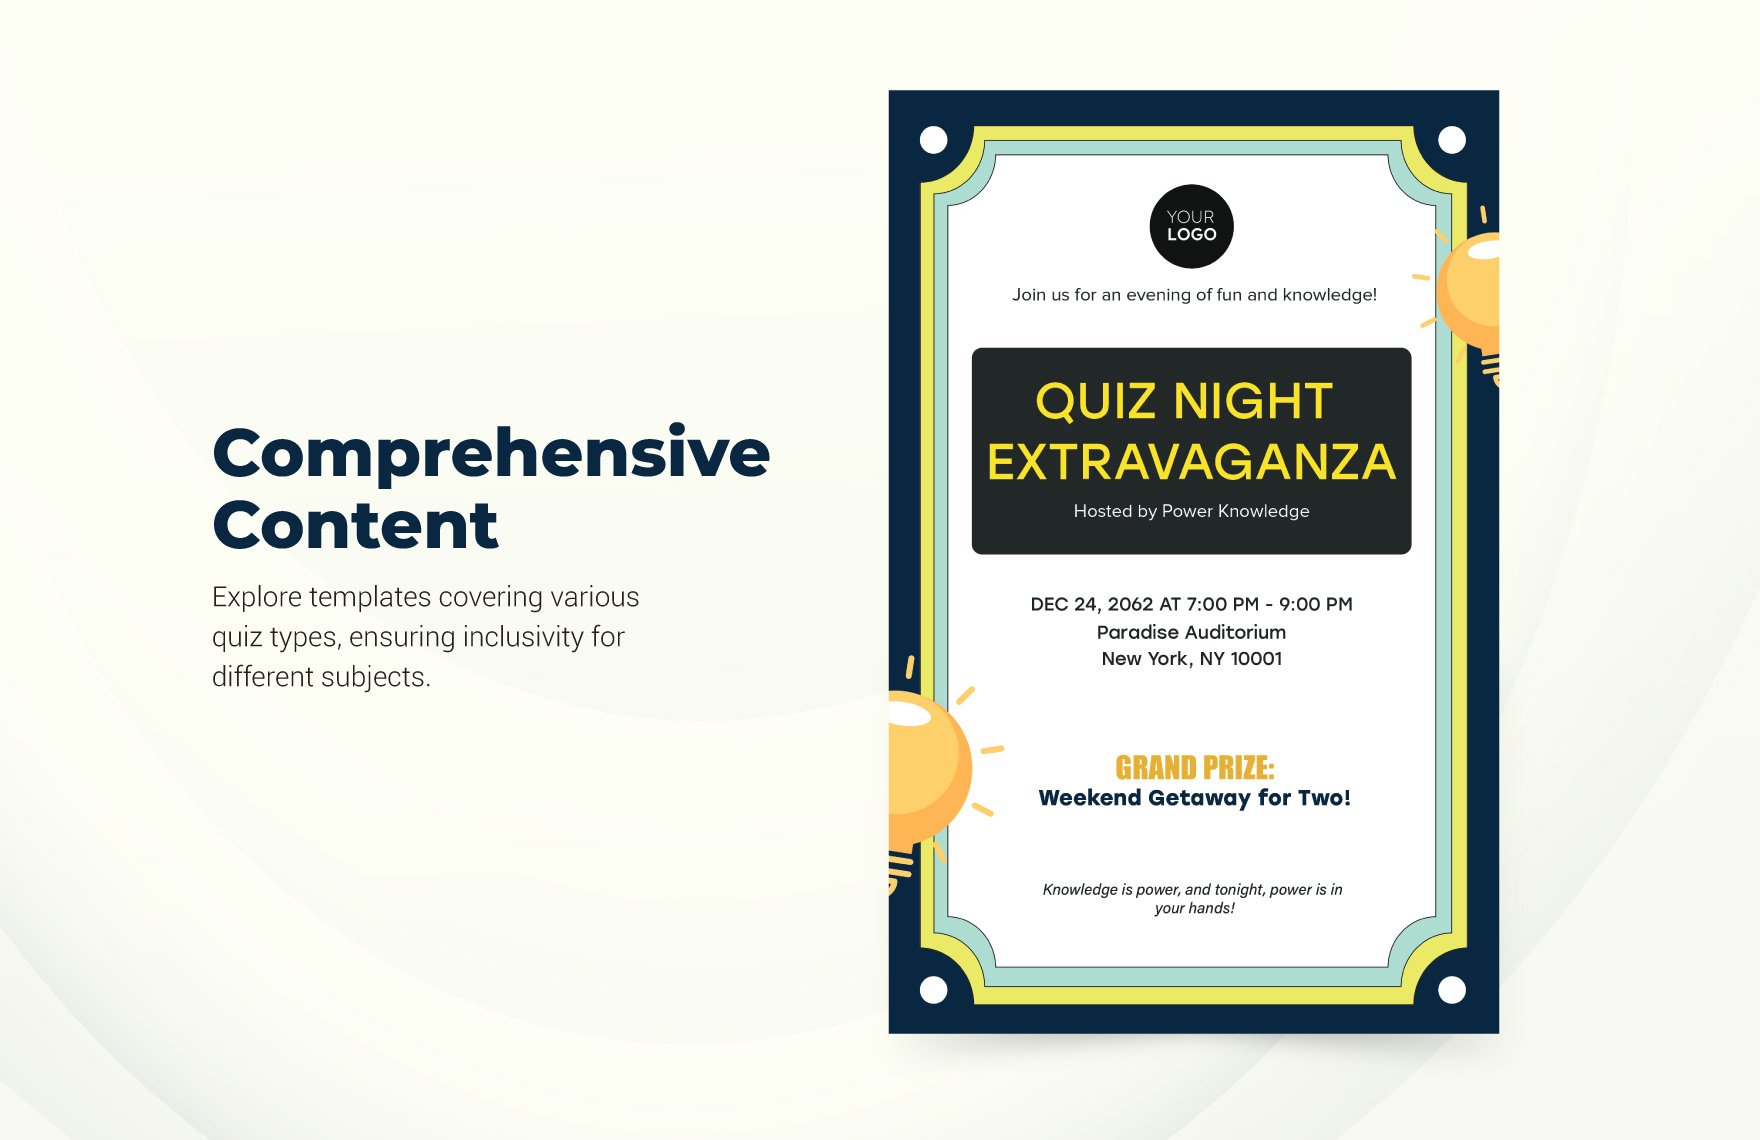 Quiz Poster Template